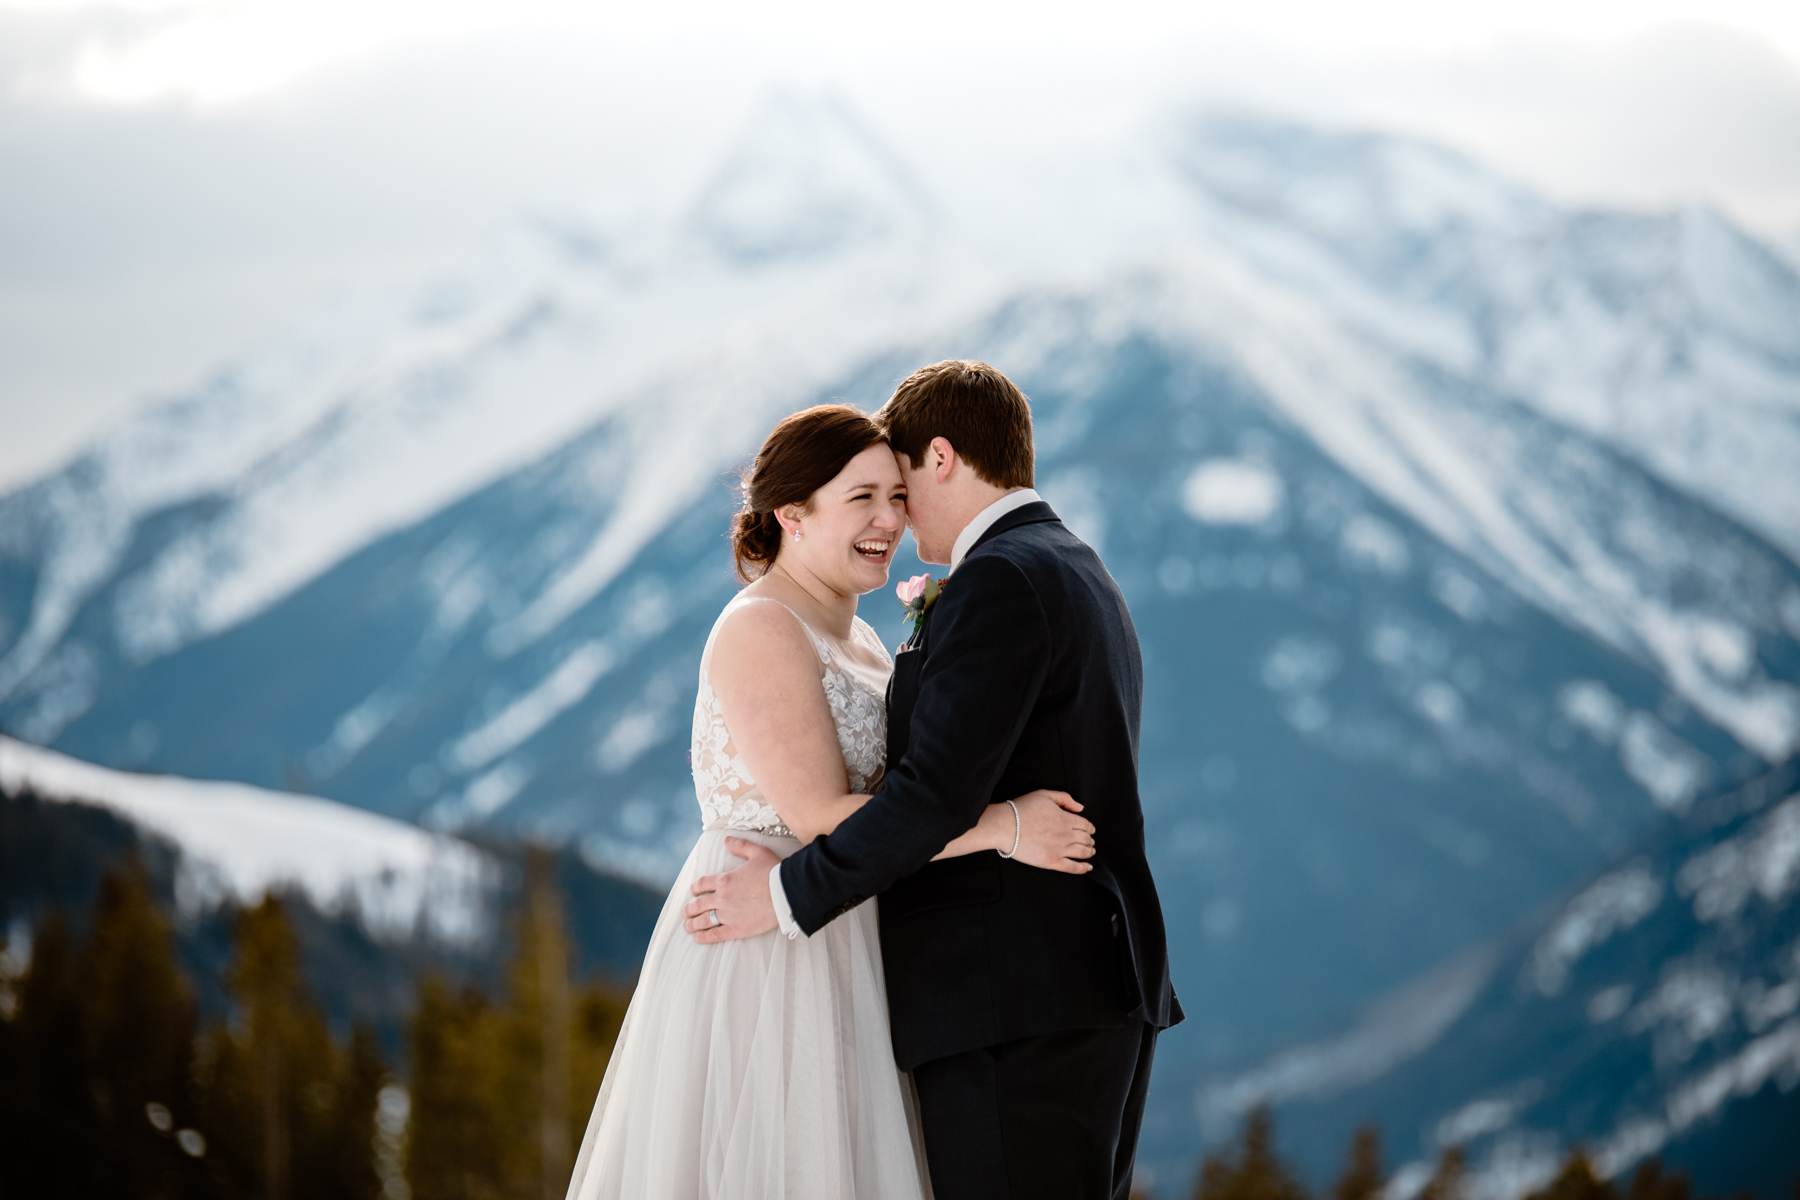 Invermere Wedding Photographers at Eagle Ranch and Panorama Ski Resort - Image 40